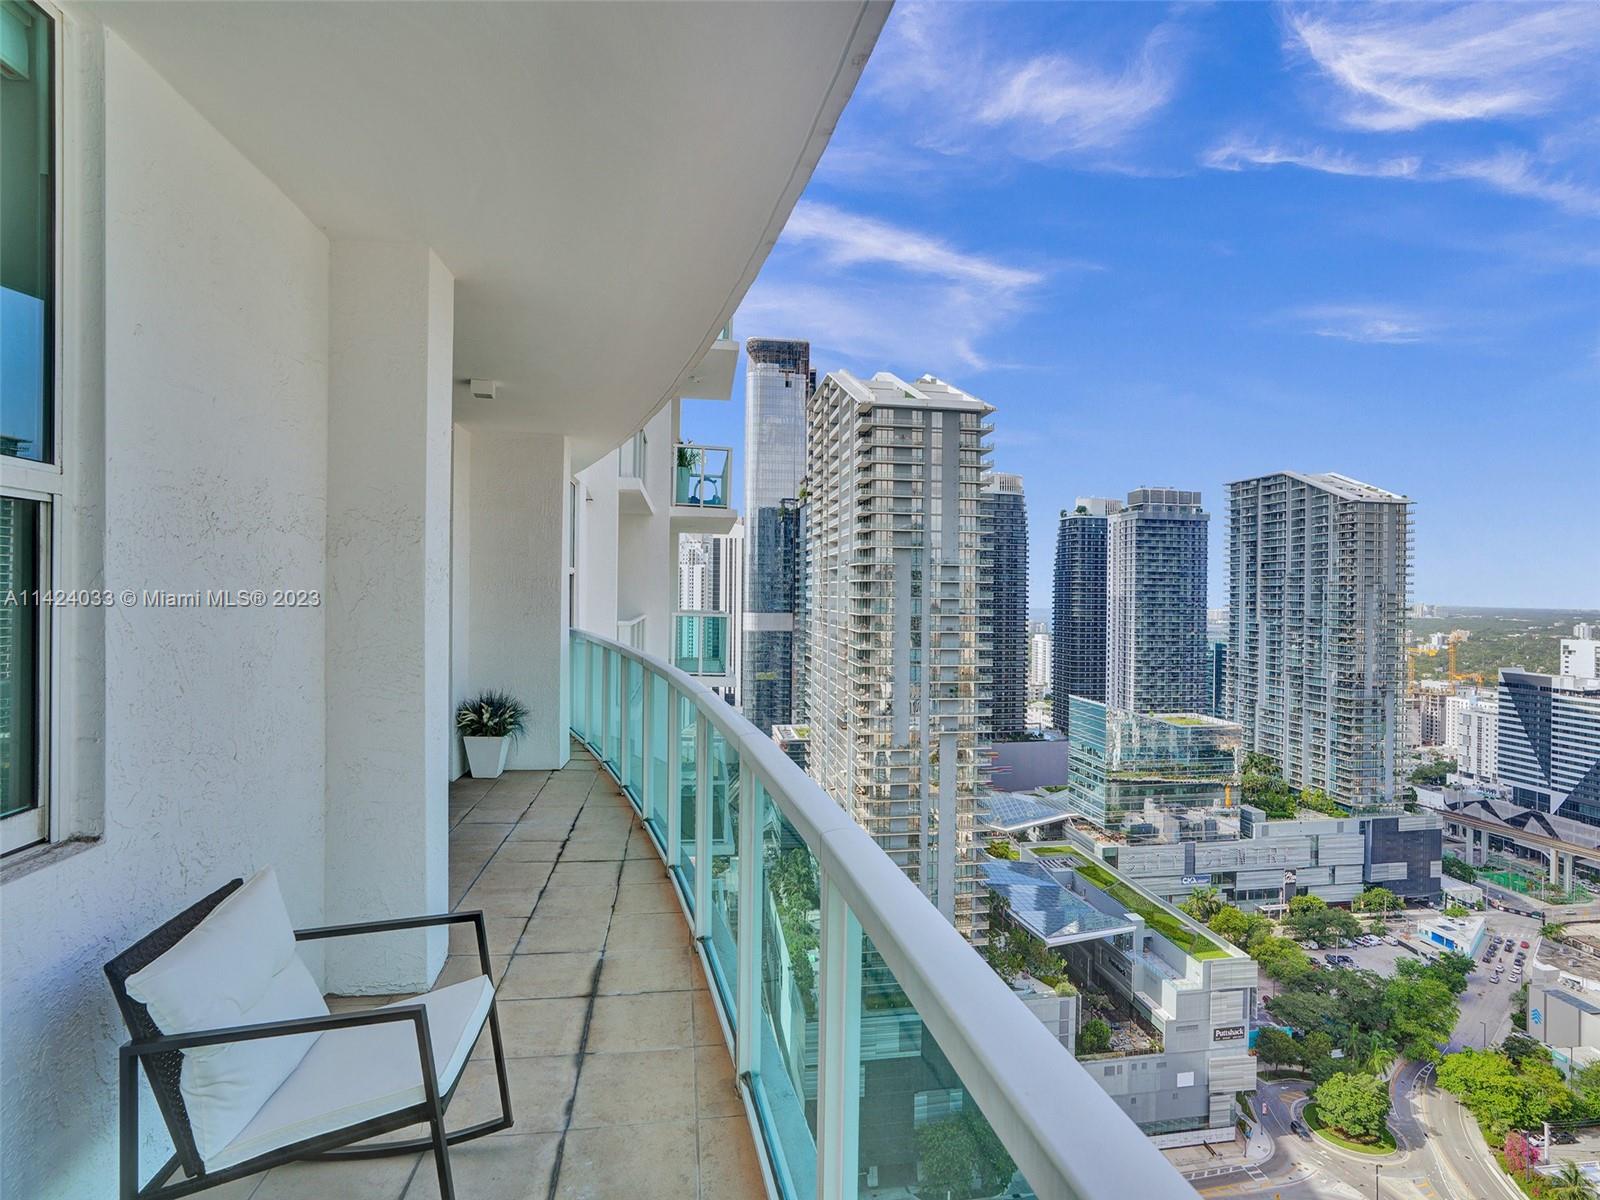 Brickell on the River North image #33